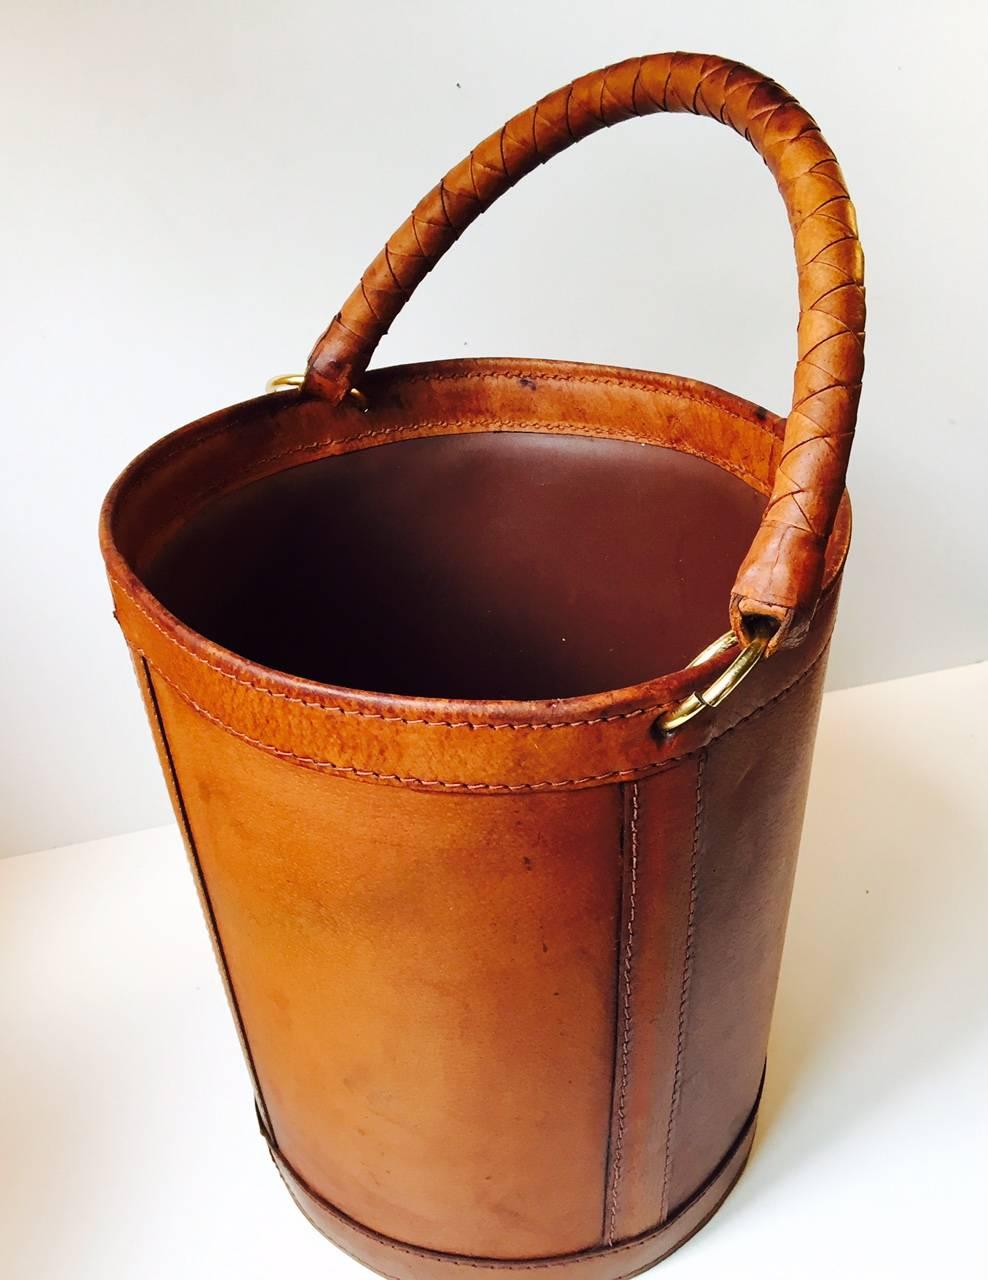 Patinated Vintage Danish Tanned Leather and Brass Trash Bin by Illums Bolighus, 1950s